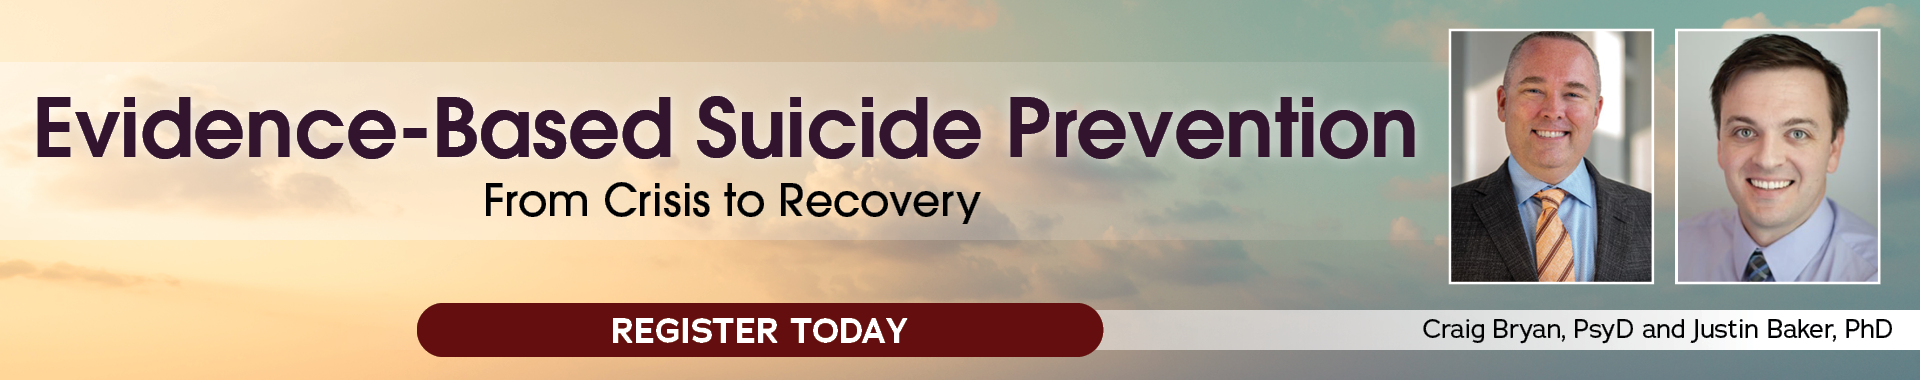 Evidence-Based Suicide Prevention Training: From Crisis to Recovery